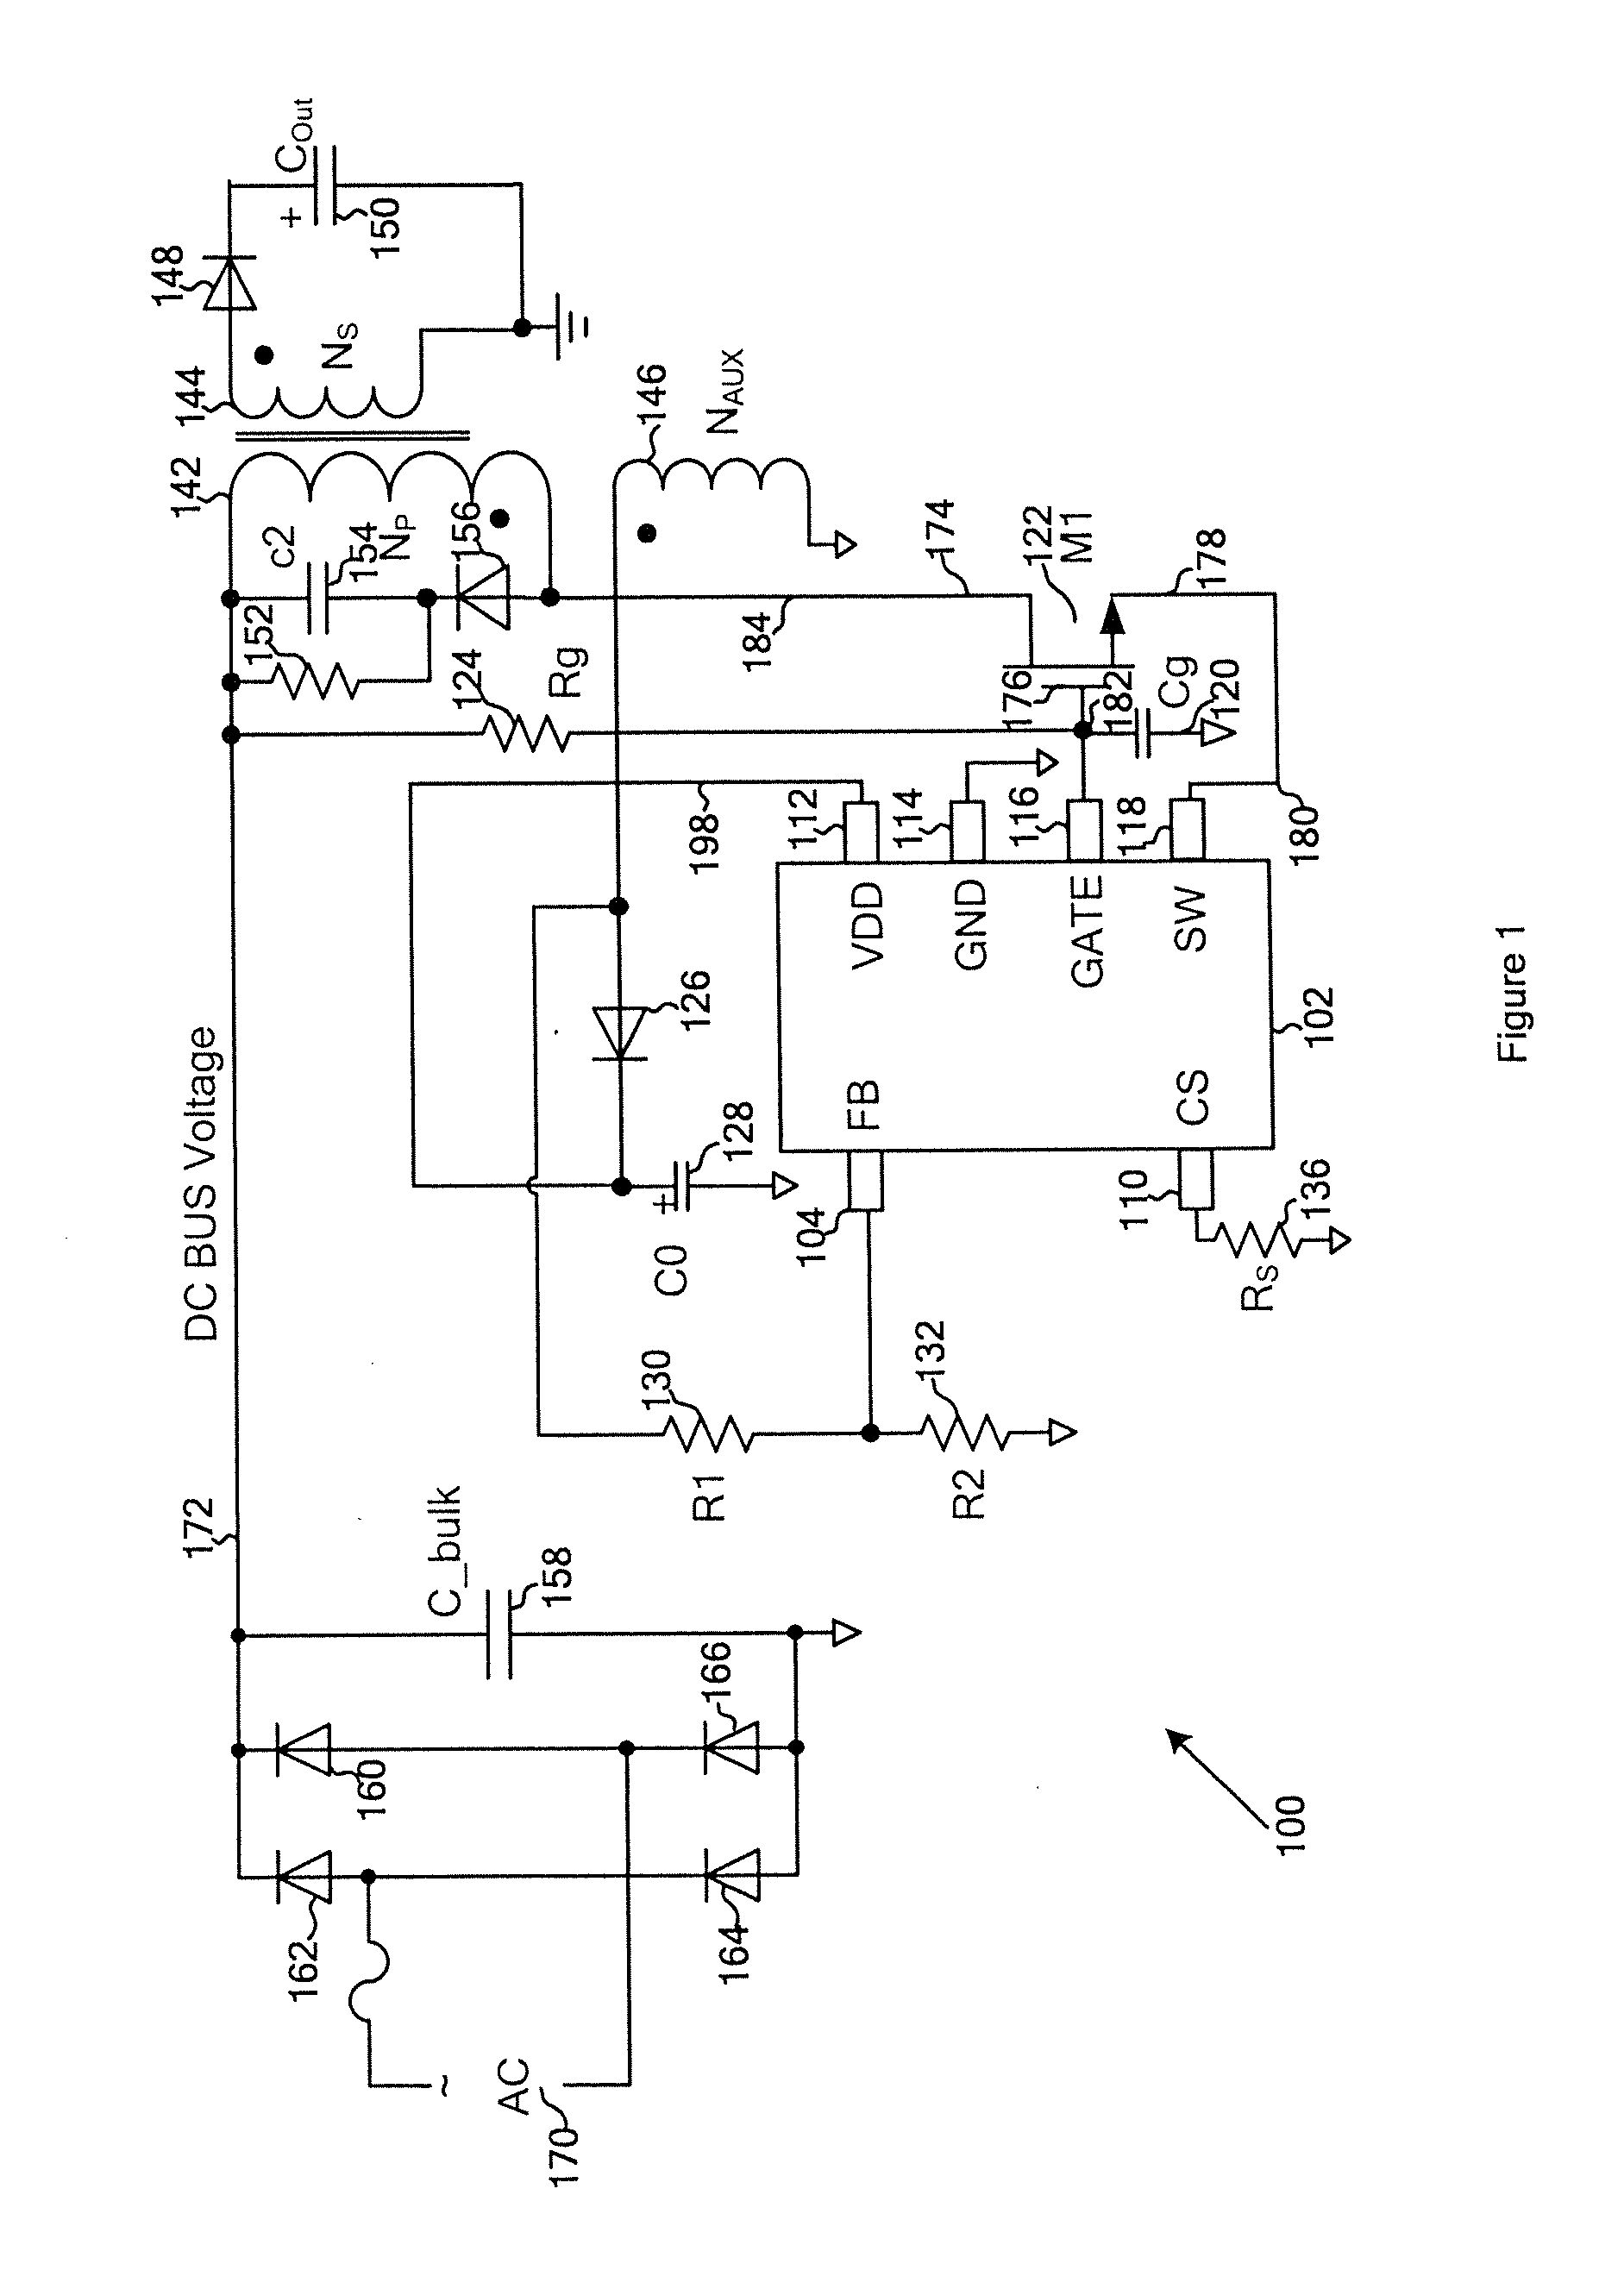 Systems and methods for source switching and voltage generation